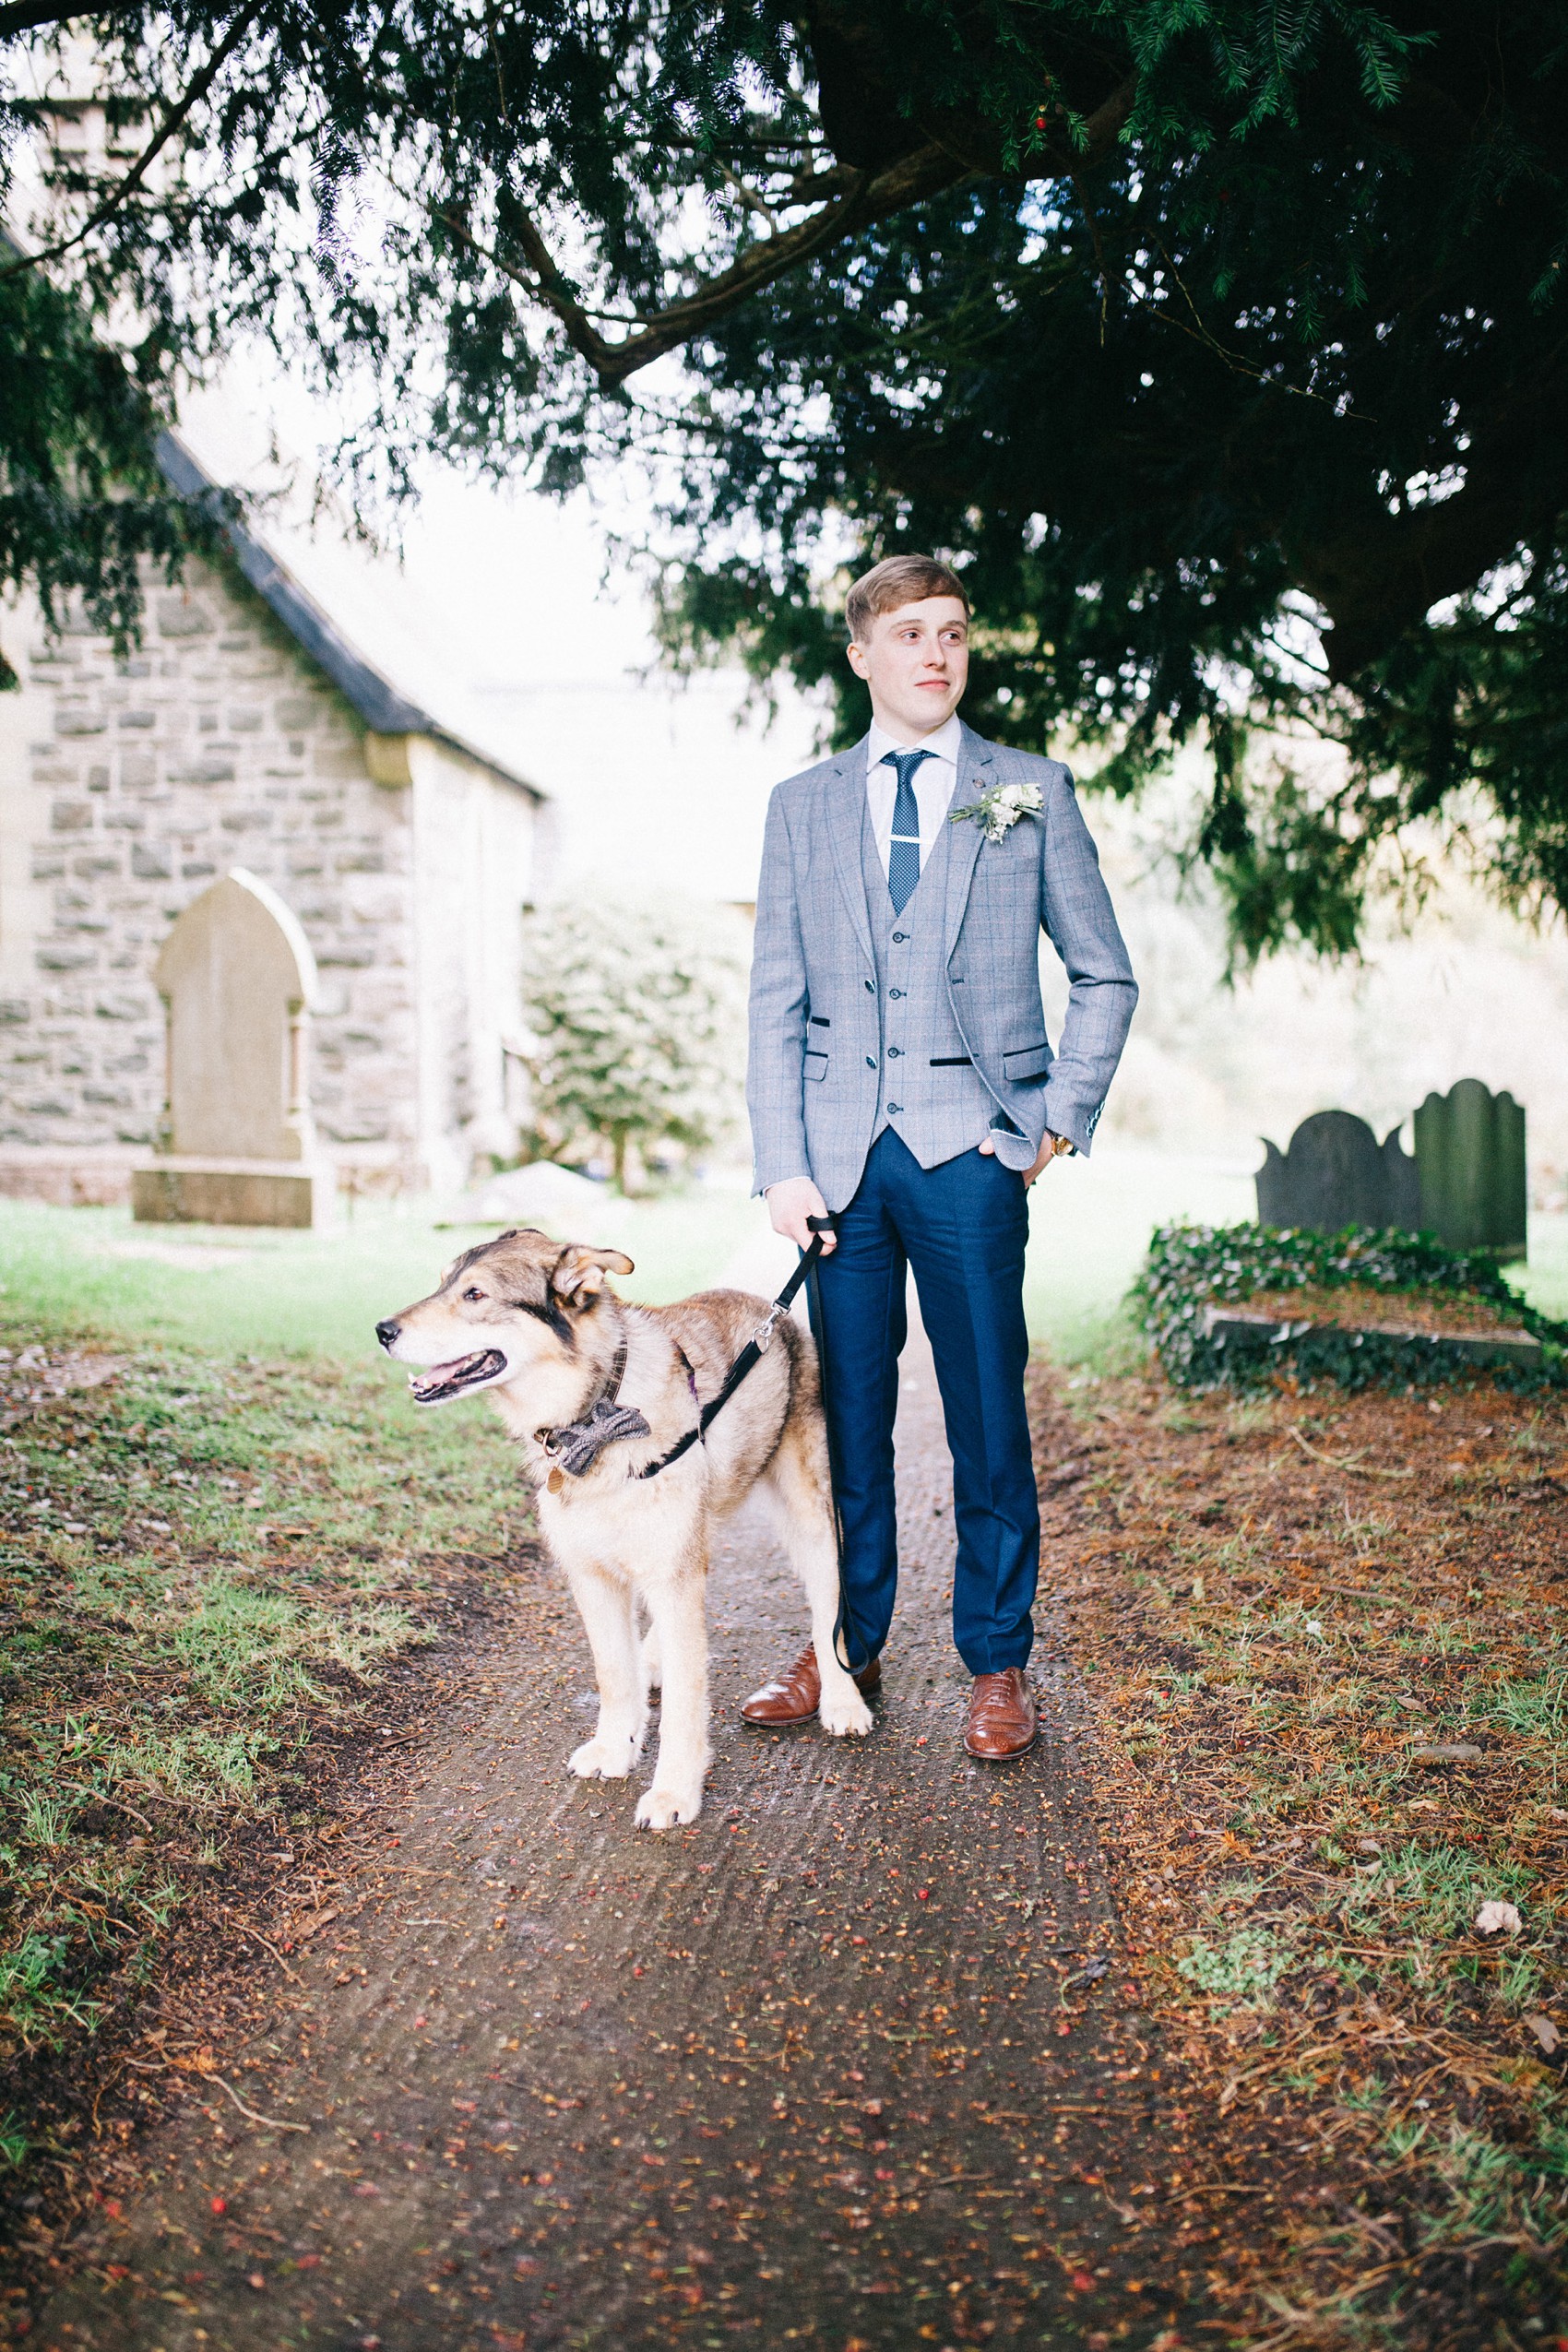  Grey Hayley Paige dress bride in glasses - A Grey Hayley Paige Dress + a Bride in Glasses for a Dog Friendly North Wales Wedding in a Deconsecrated Medieval Church